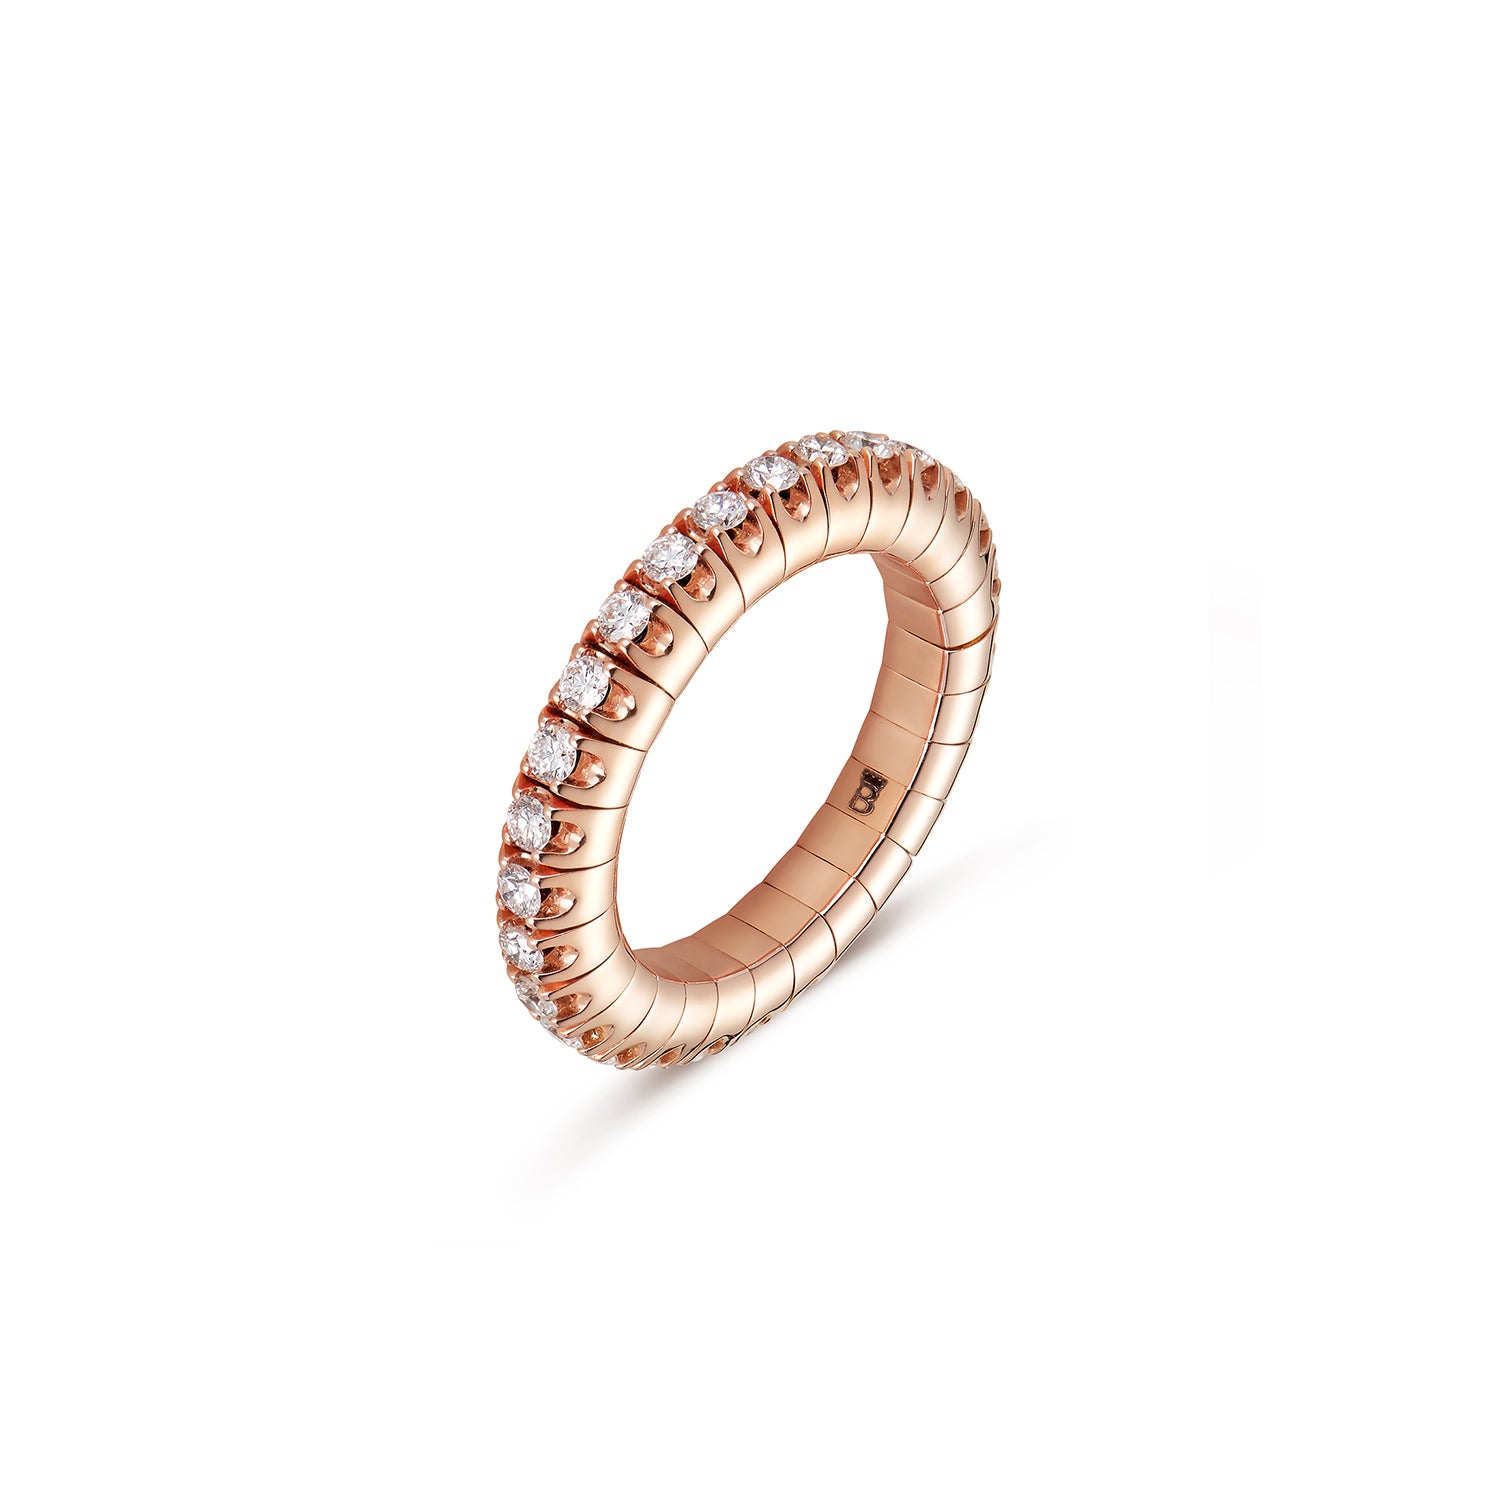 Flow ring rose gold and diamonds